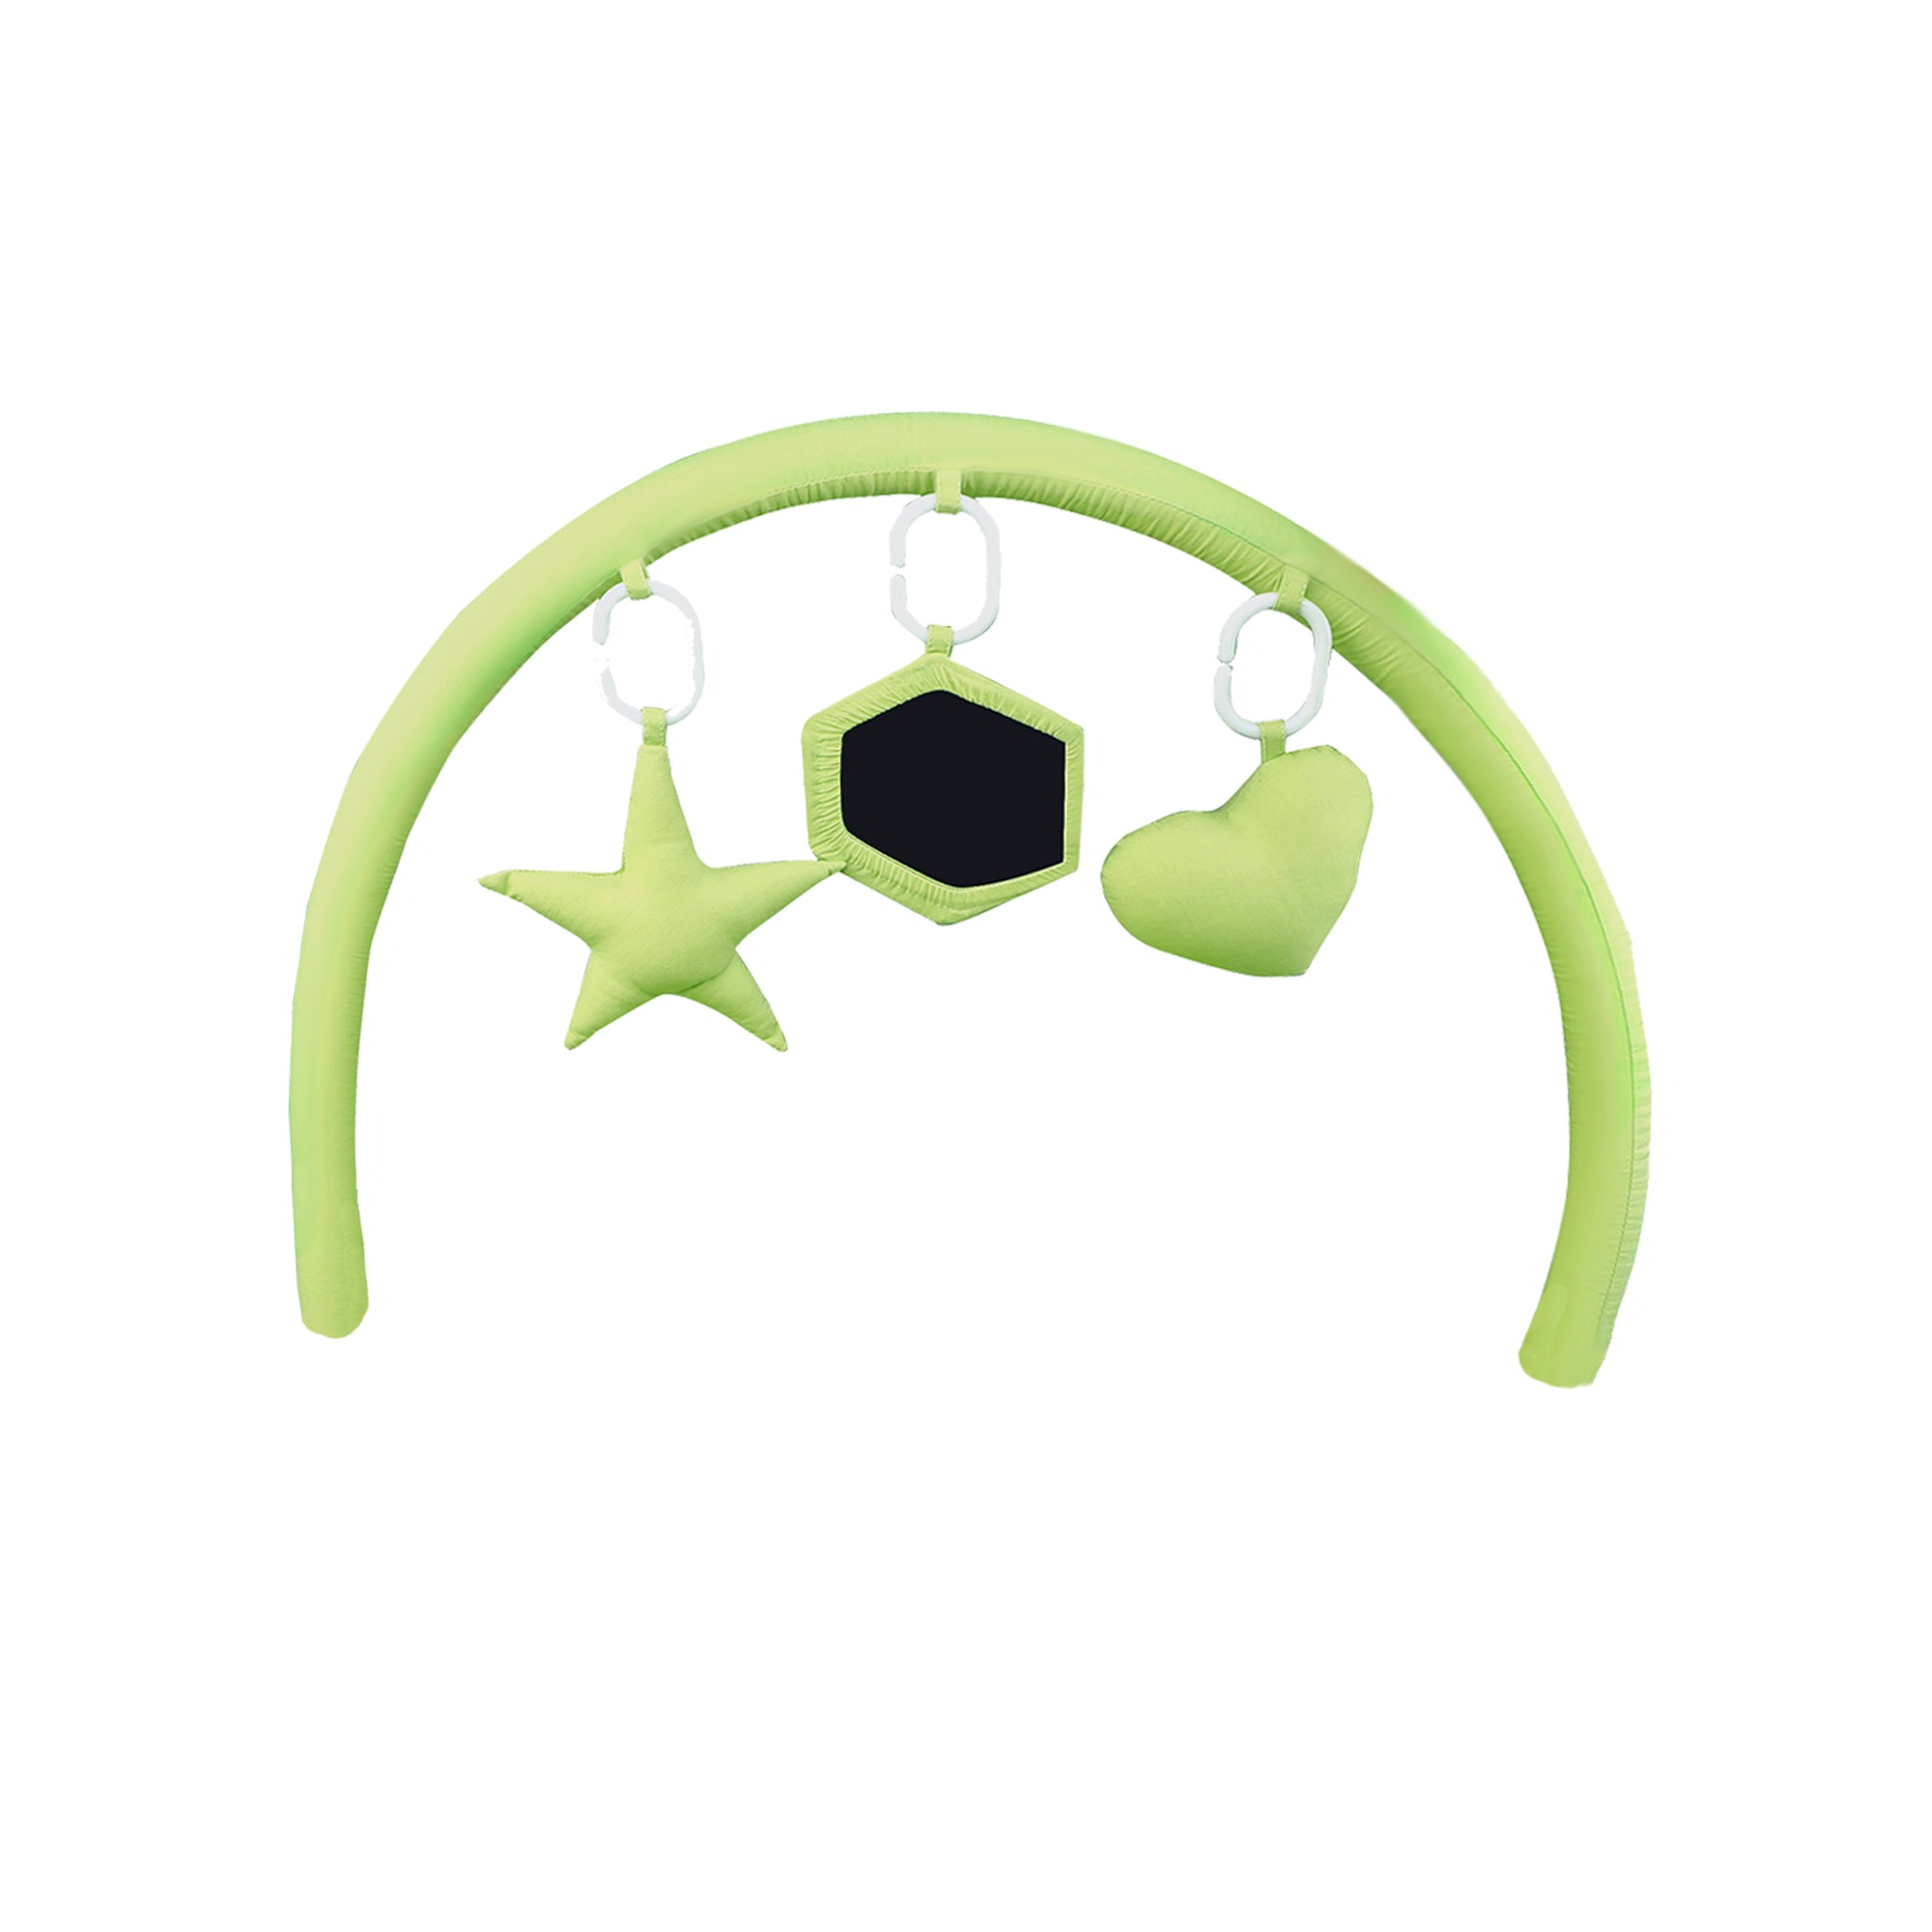 SHADOW LIME PLAY GYM ATTACHMENT FOR NESTO PAD